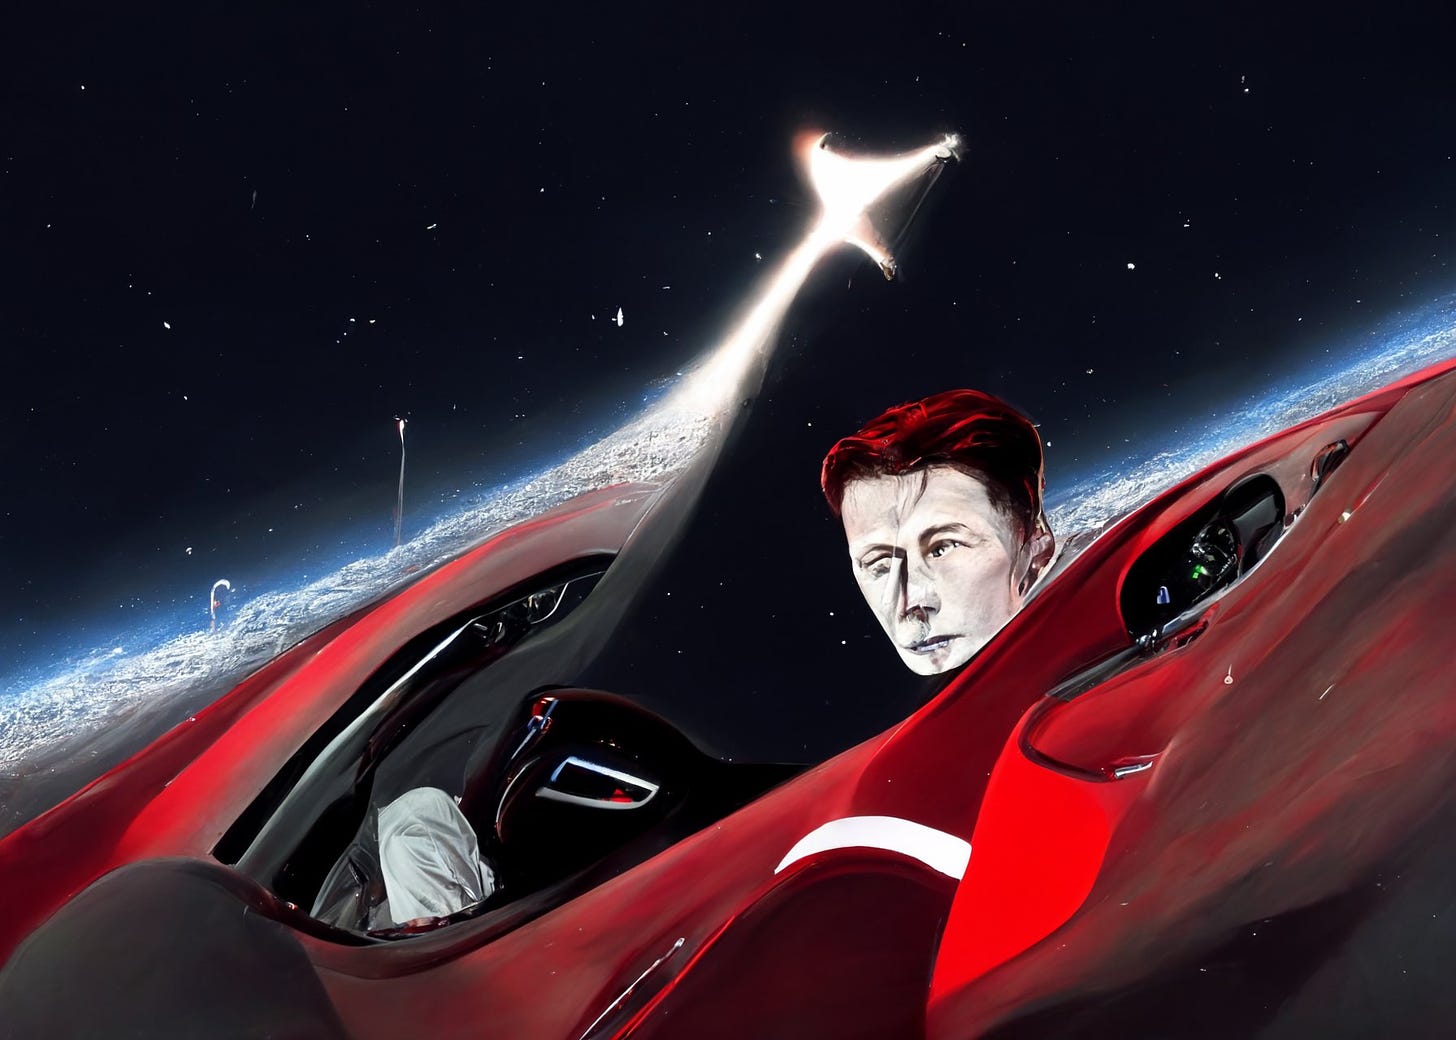 CopperScale on Twitter: "Starman riding in space ina Tesla. #midjourney  #ArtificialIntelligence https://t.co/YJAl2FowM6" / X